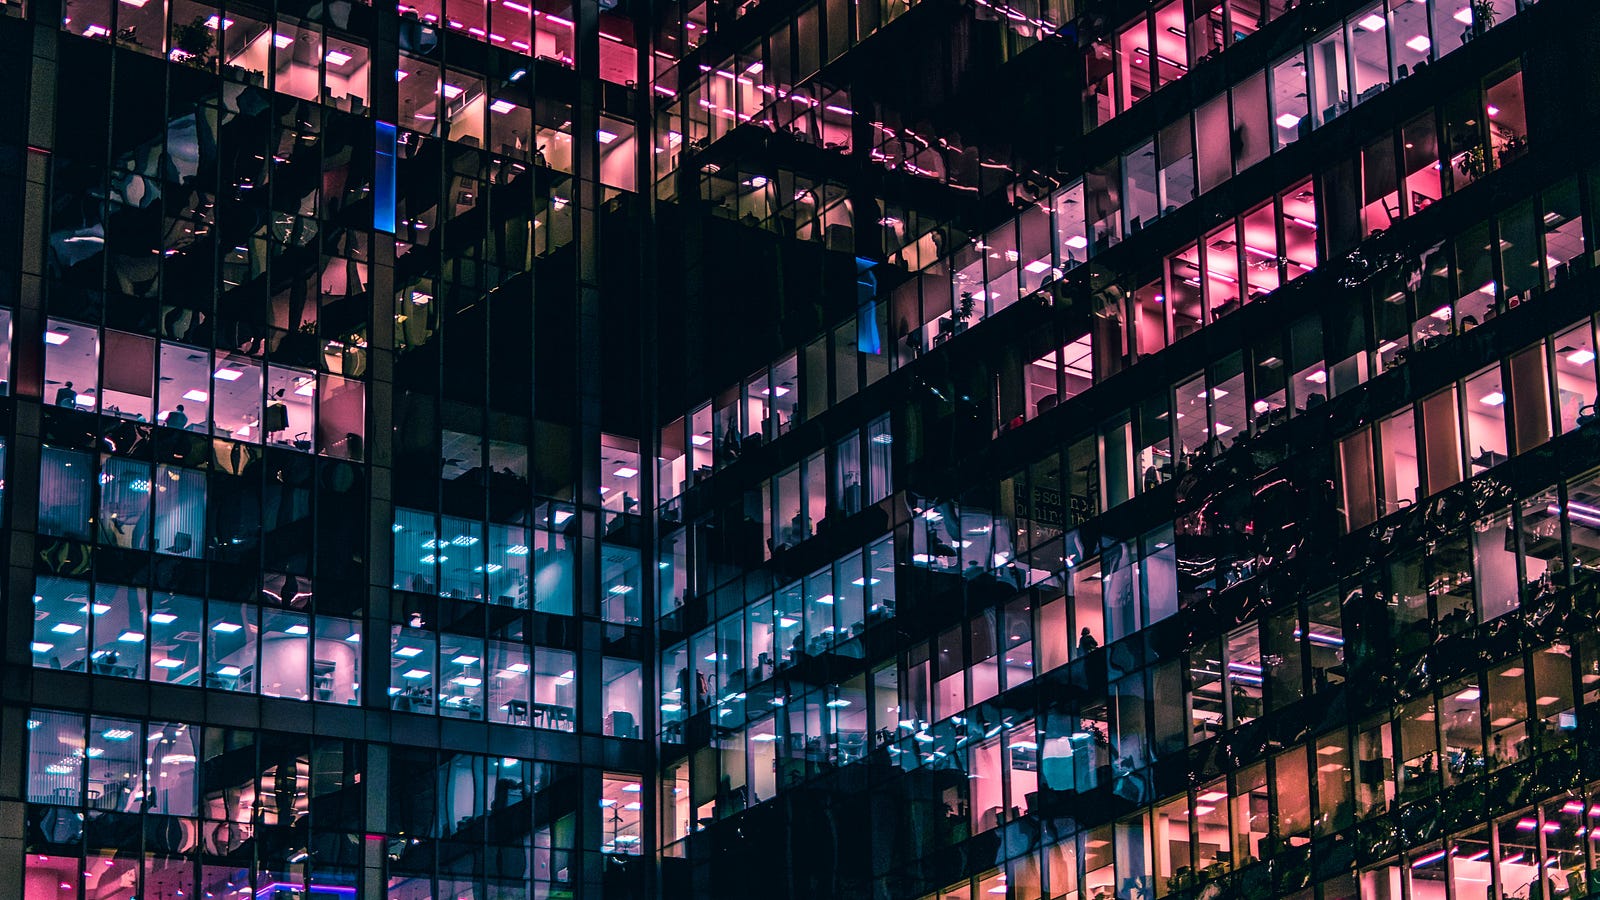 “Lights in the windows of an office building in Moscow” by Mike Kononov on Unsplash